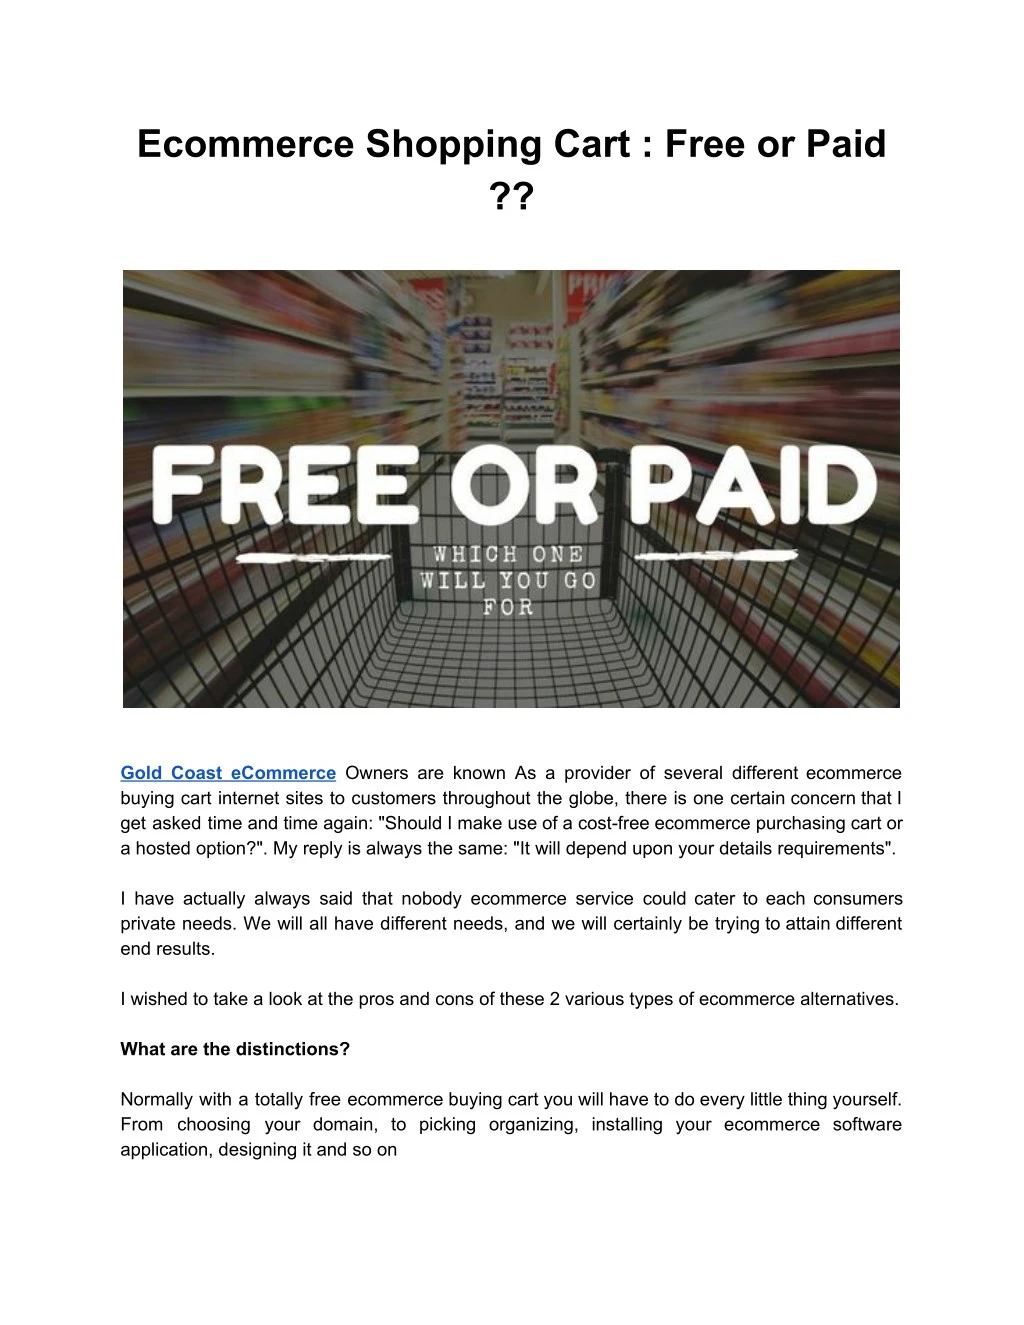 ecommerce shopping cart free or paid